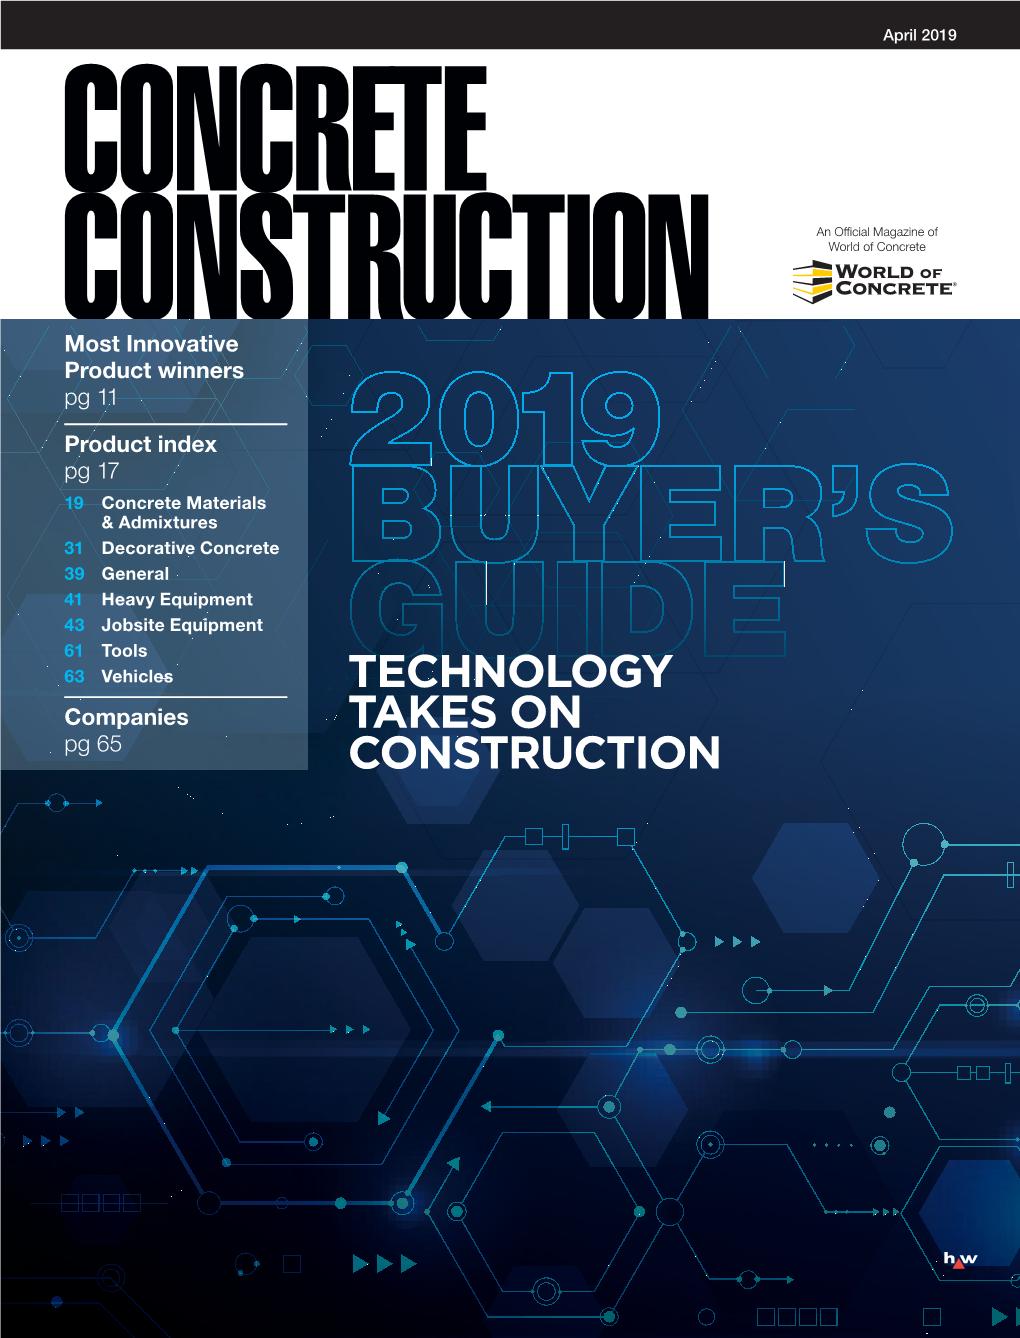 Technology Takes on Construction